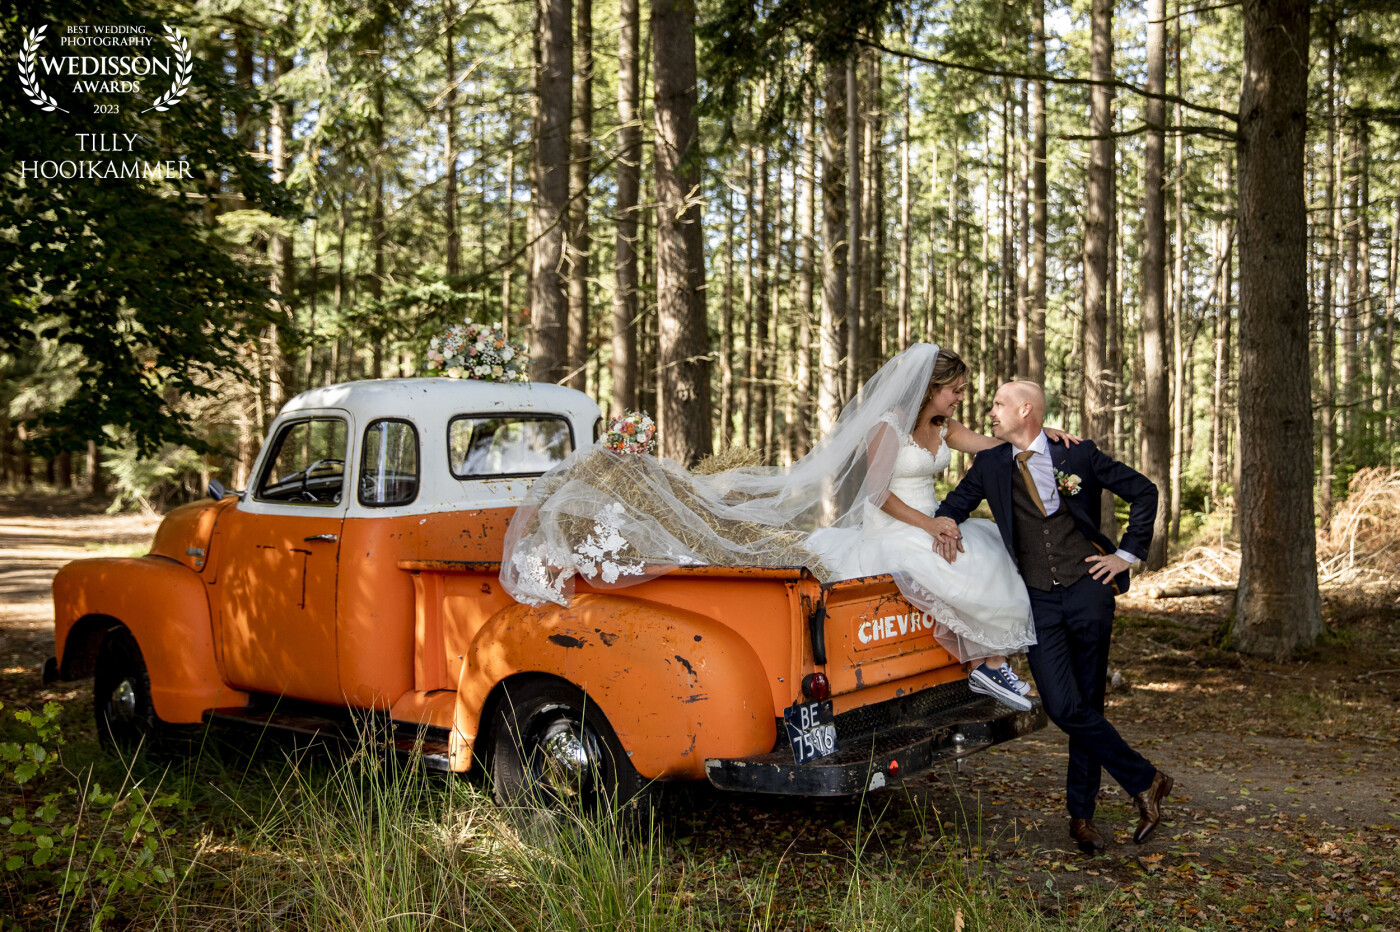 5 minutes before this photo was taken, the bridal couple was still running through the woods. Running from the rain. But as is the case in the Netherlands, the sun immediately shone again and the bridal couple climbed onto the truck. Time for this beautiful picture